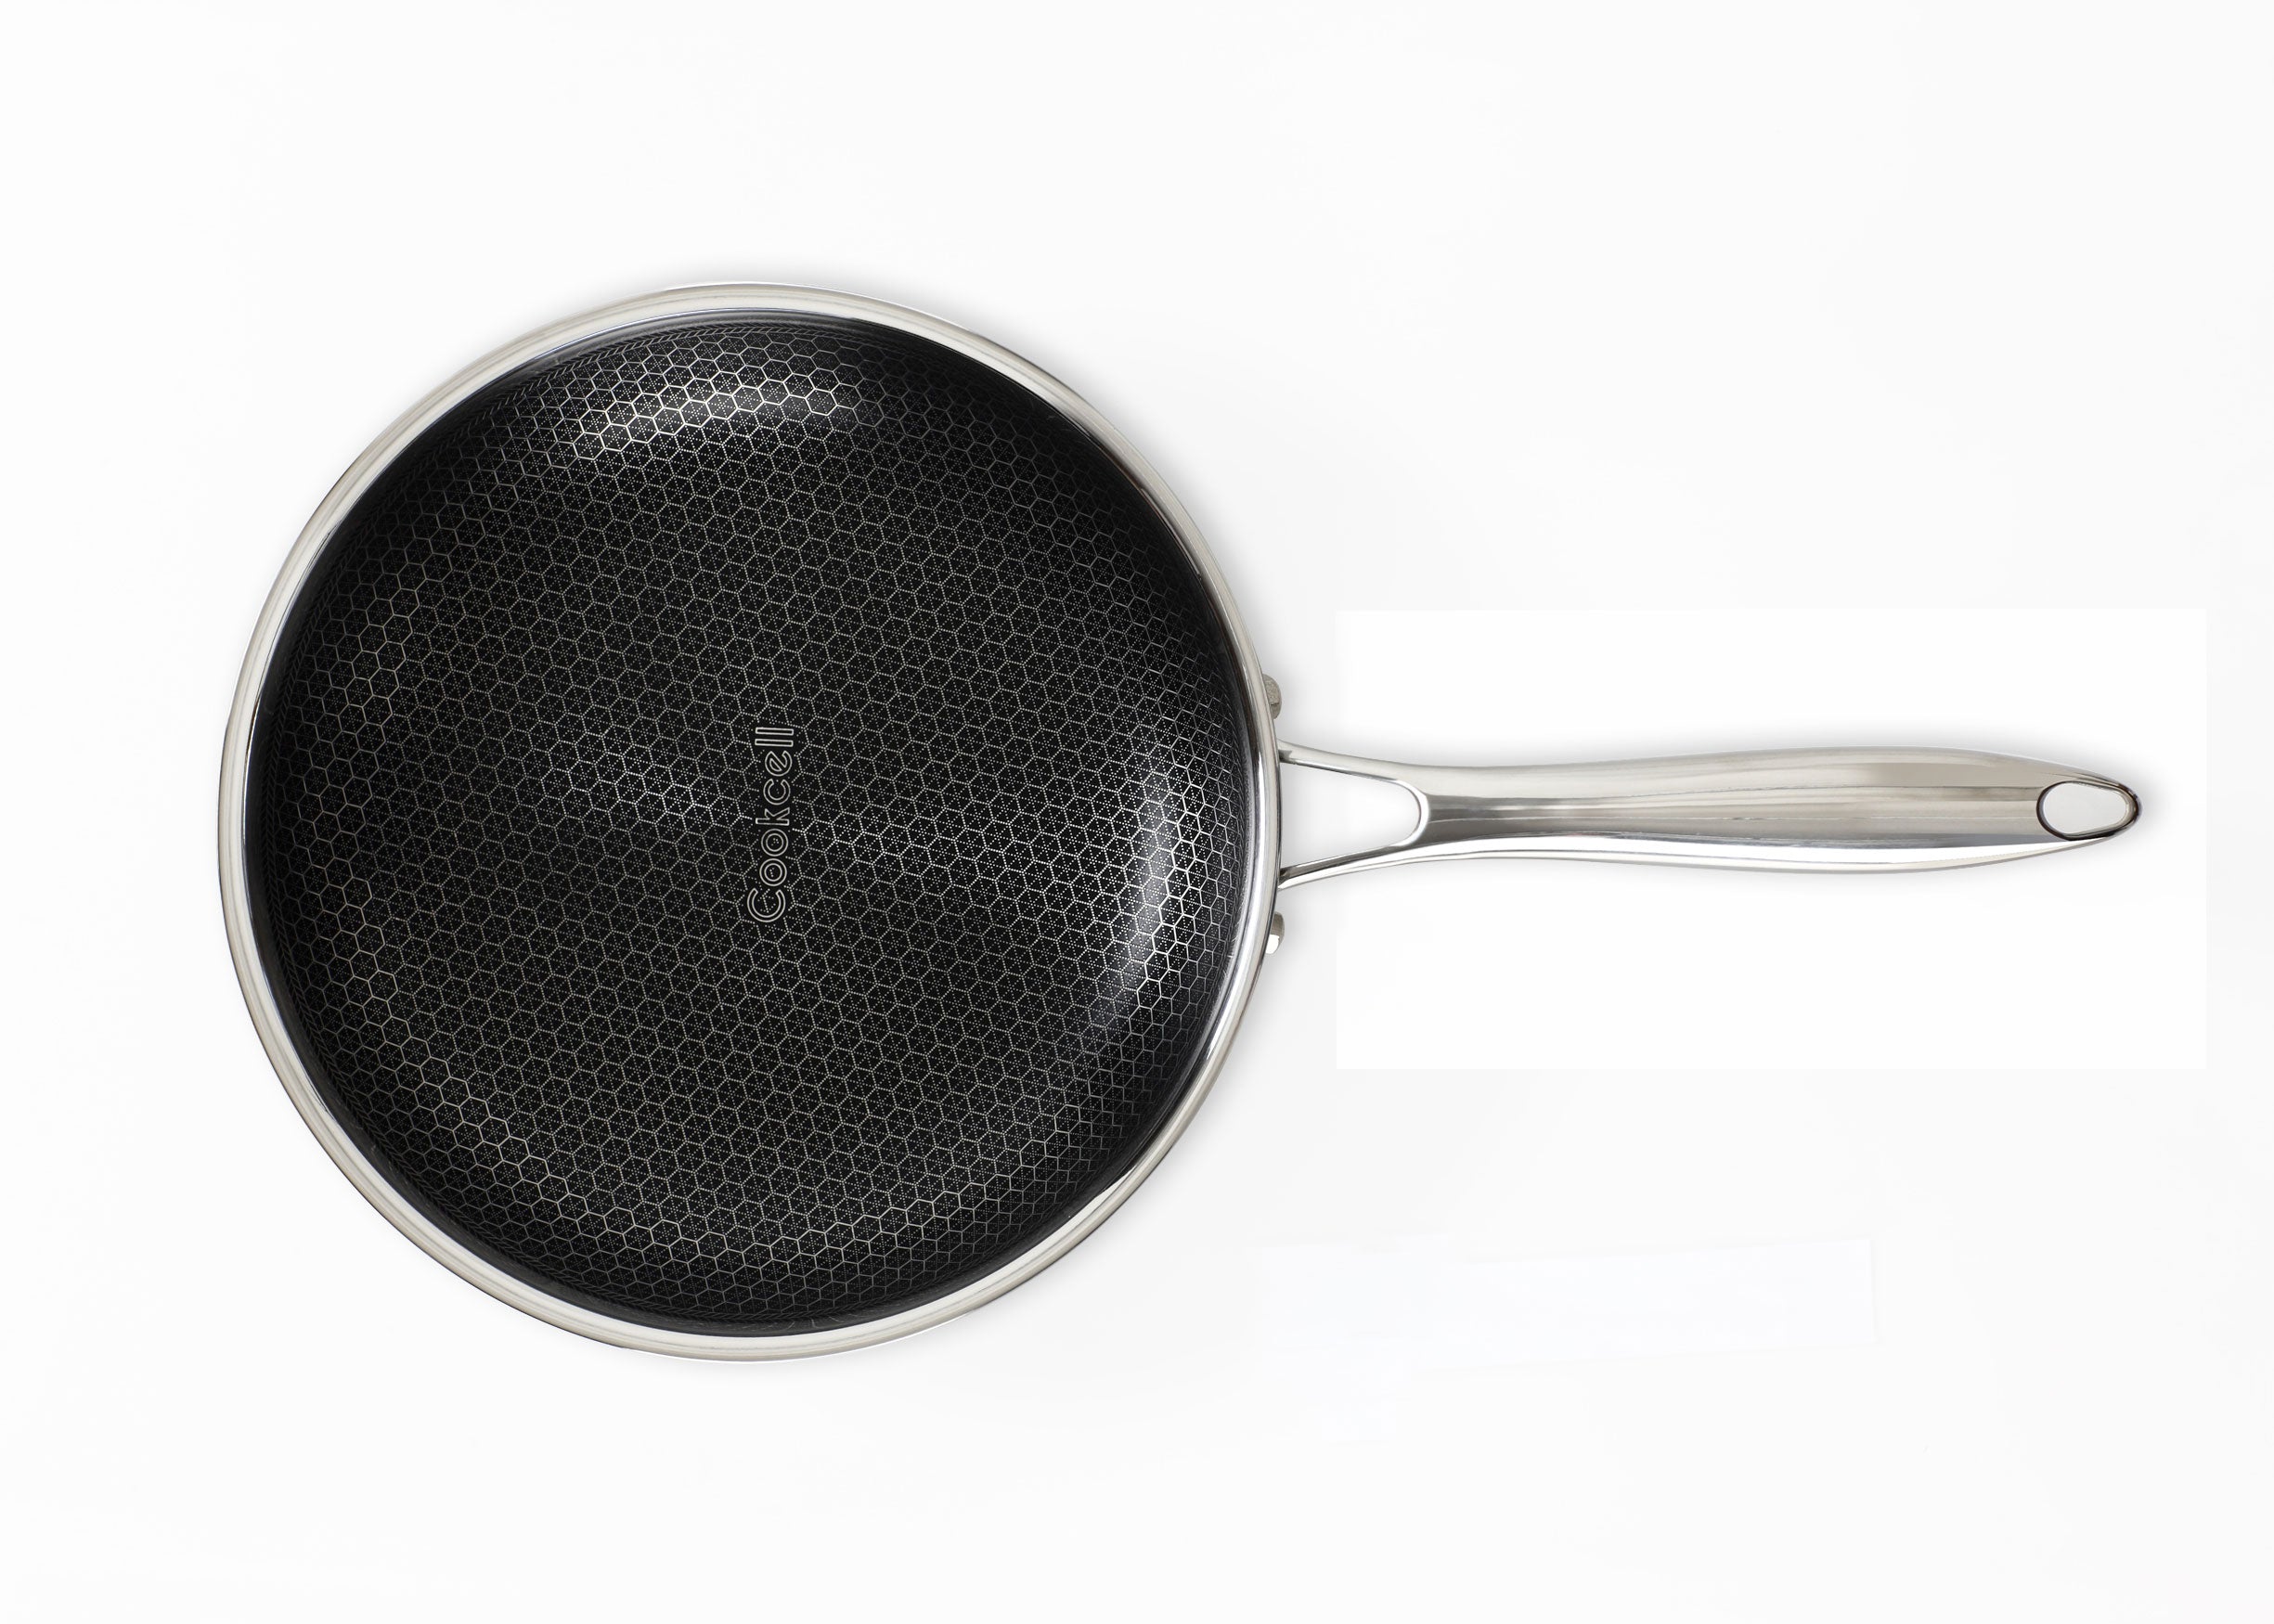 COOKCELL Stainless Steel Non-stick Hybrid Frypan 26cm